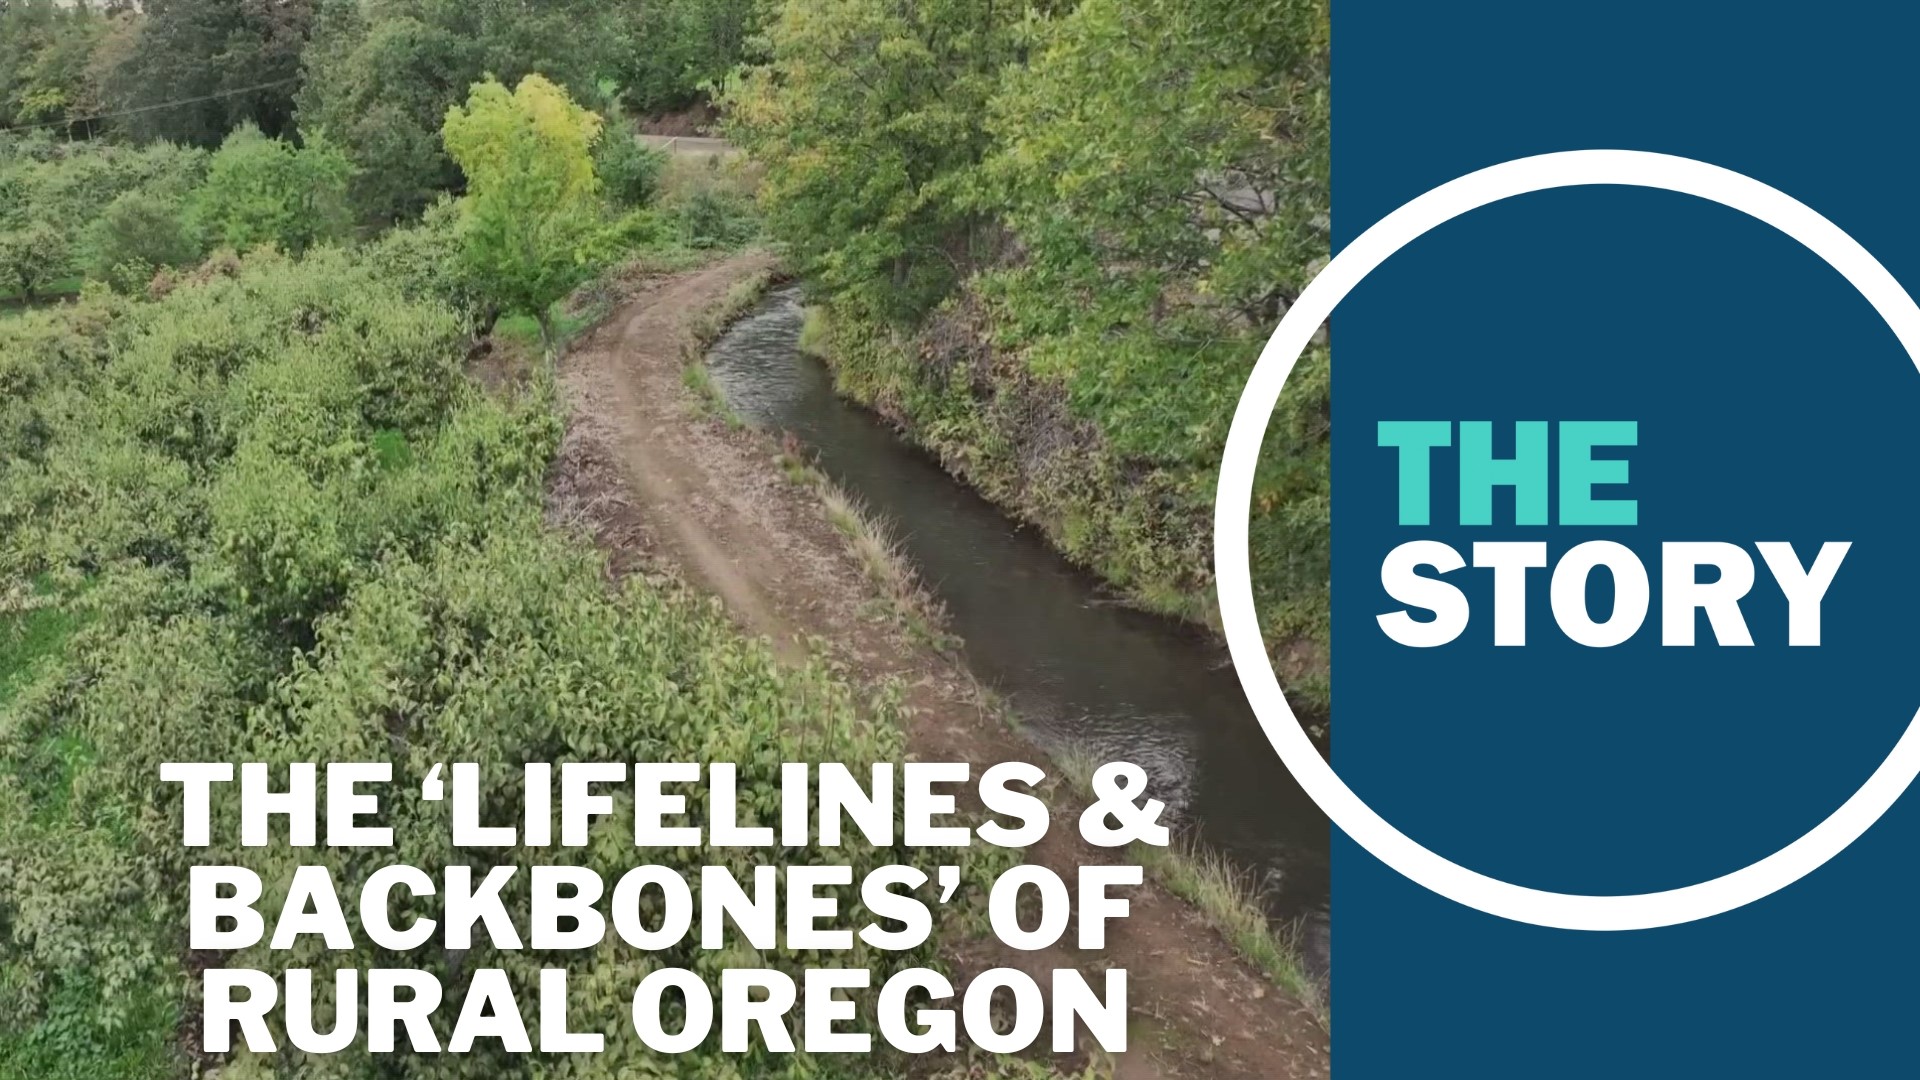 Some of Oregon's irrigation canals date back to the 1800s, and they're inefficient for farmers and the environment alike. But upgrades don't come cheap.